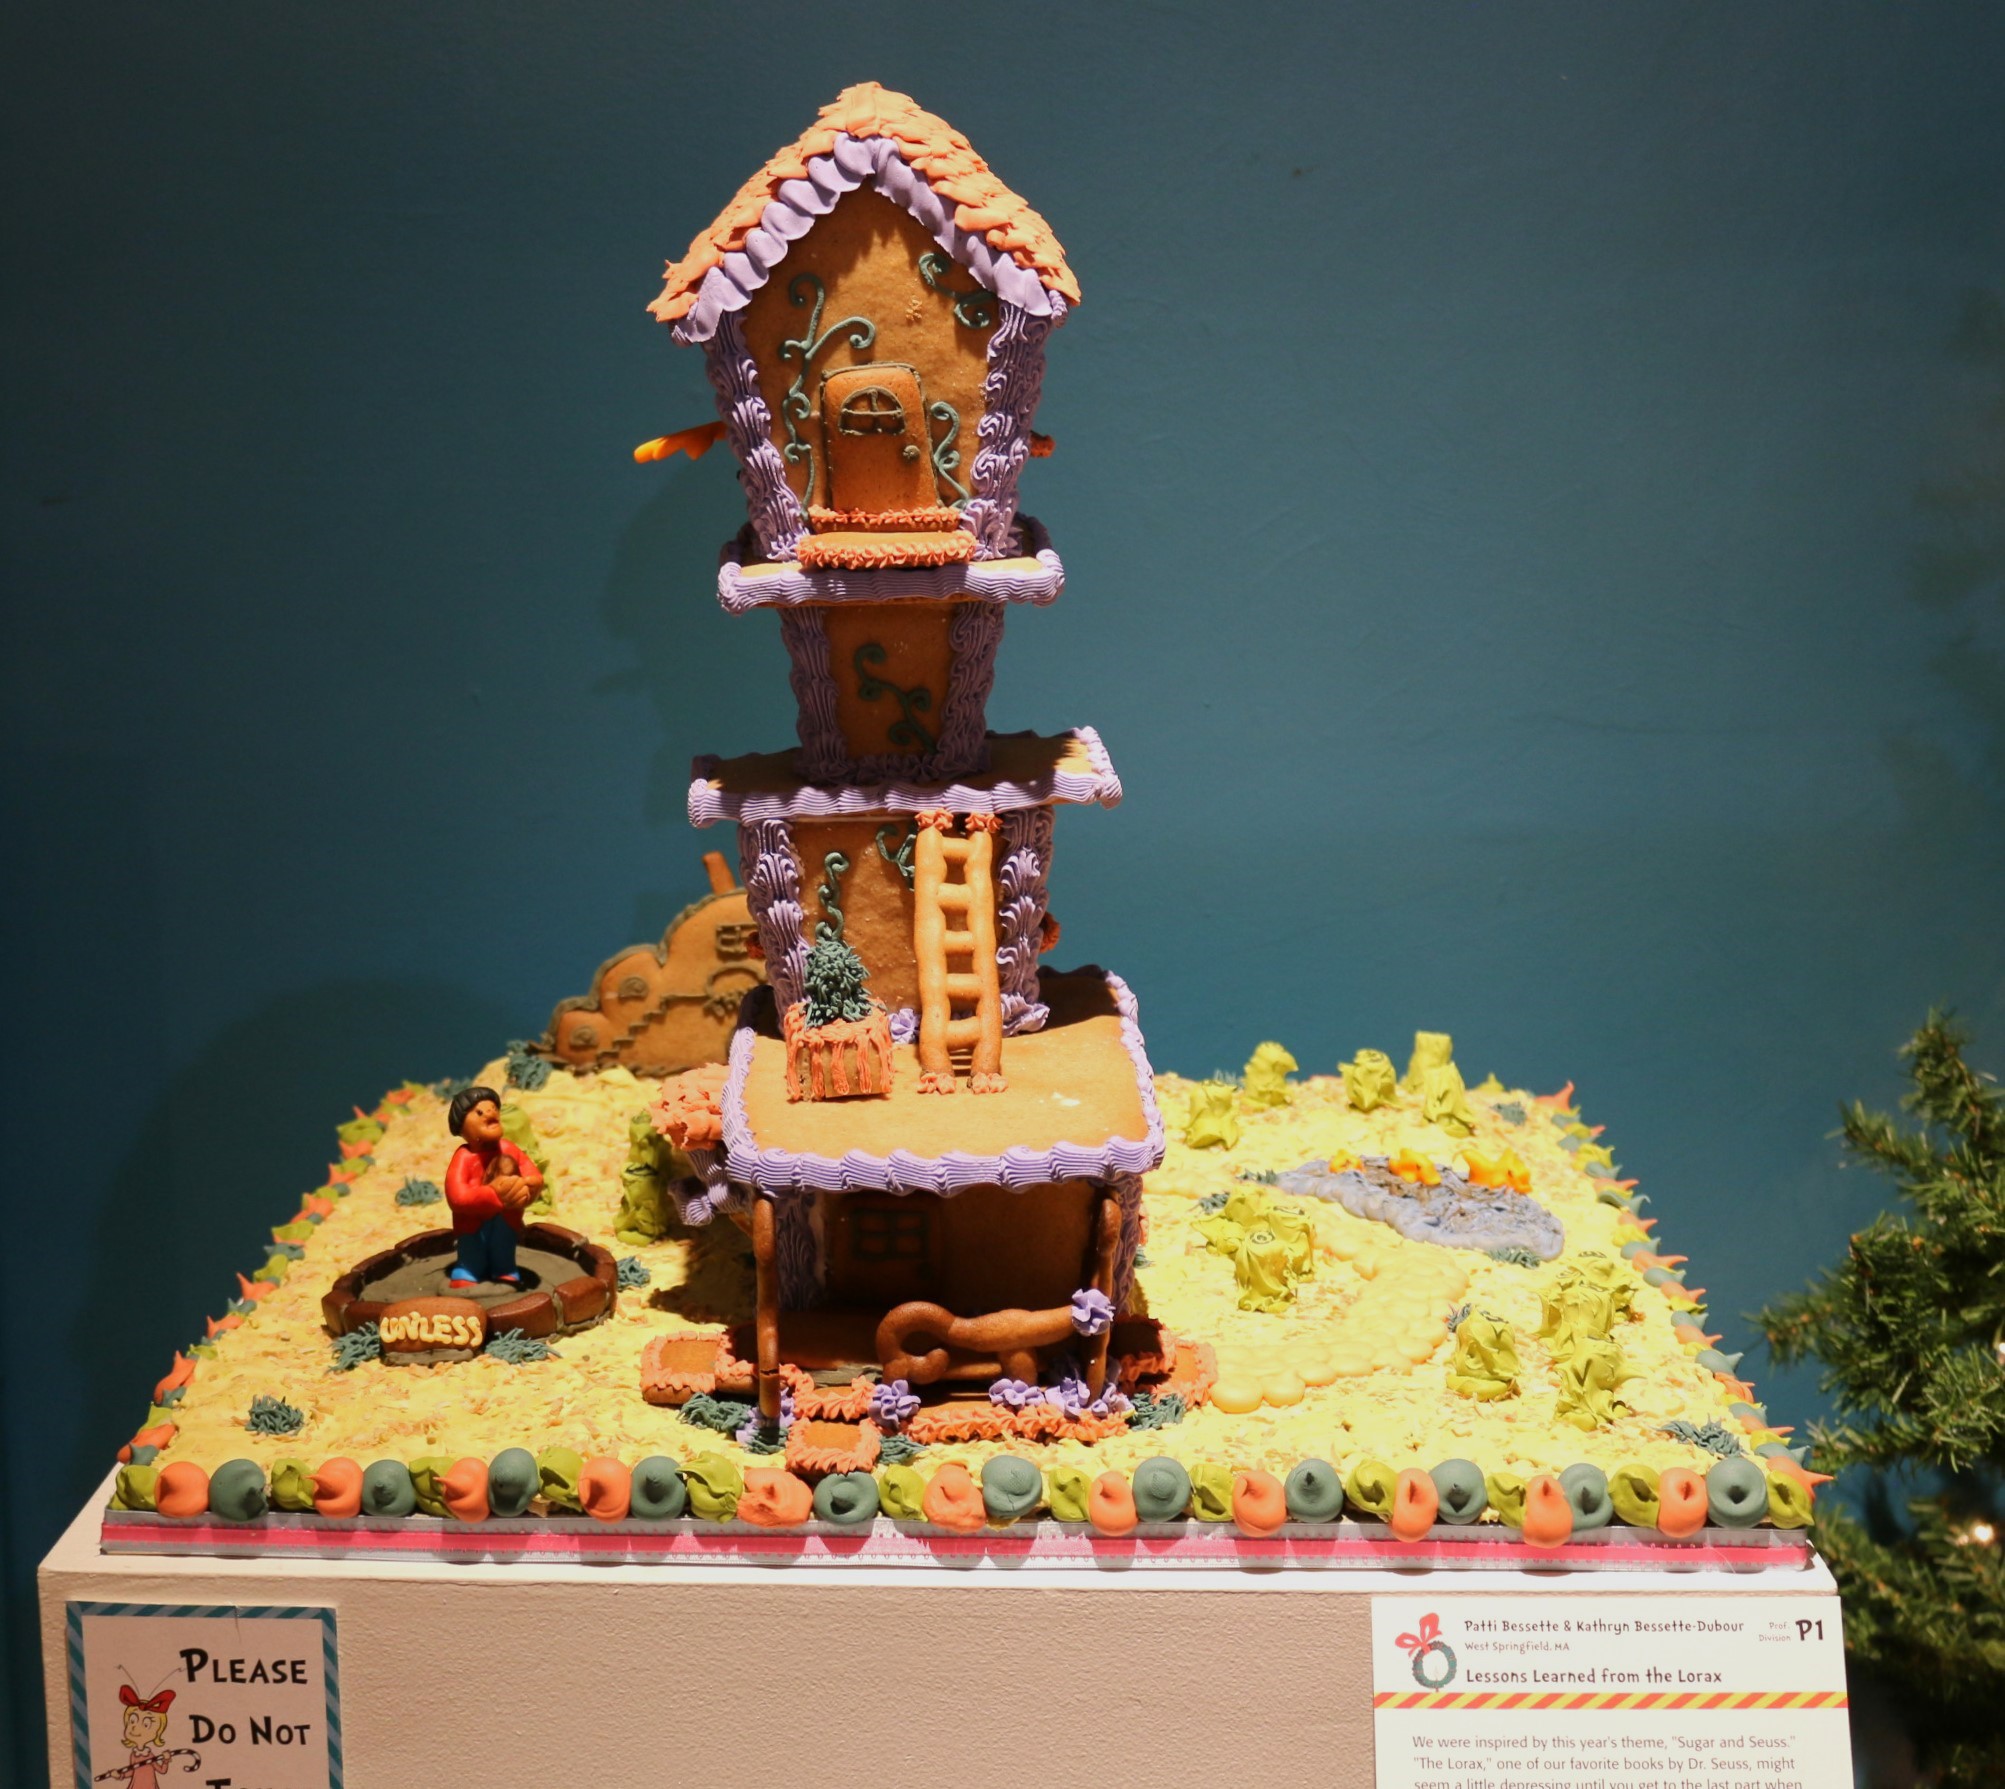 Gingerbread display titled "Lessons Learned from the Lorax" by Patricia Bessette & Kathryn Bessette-Dubour